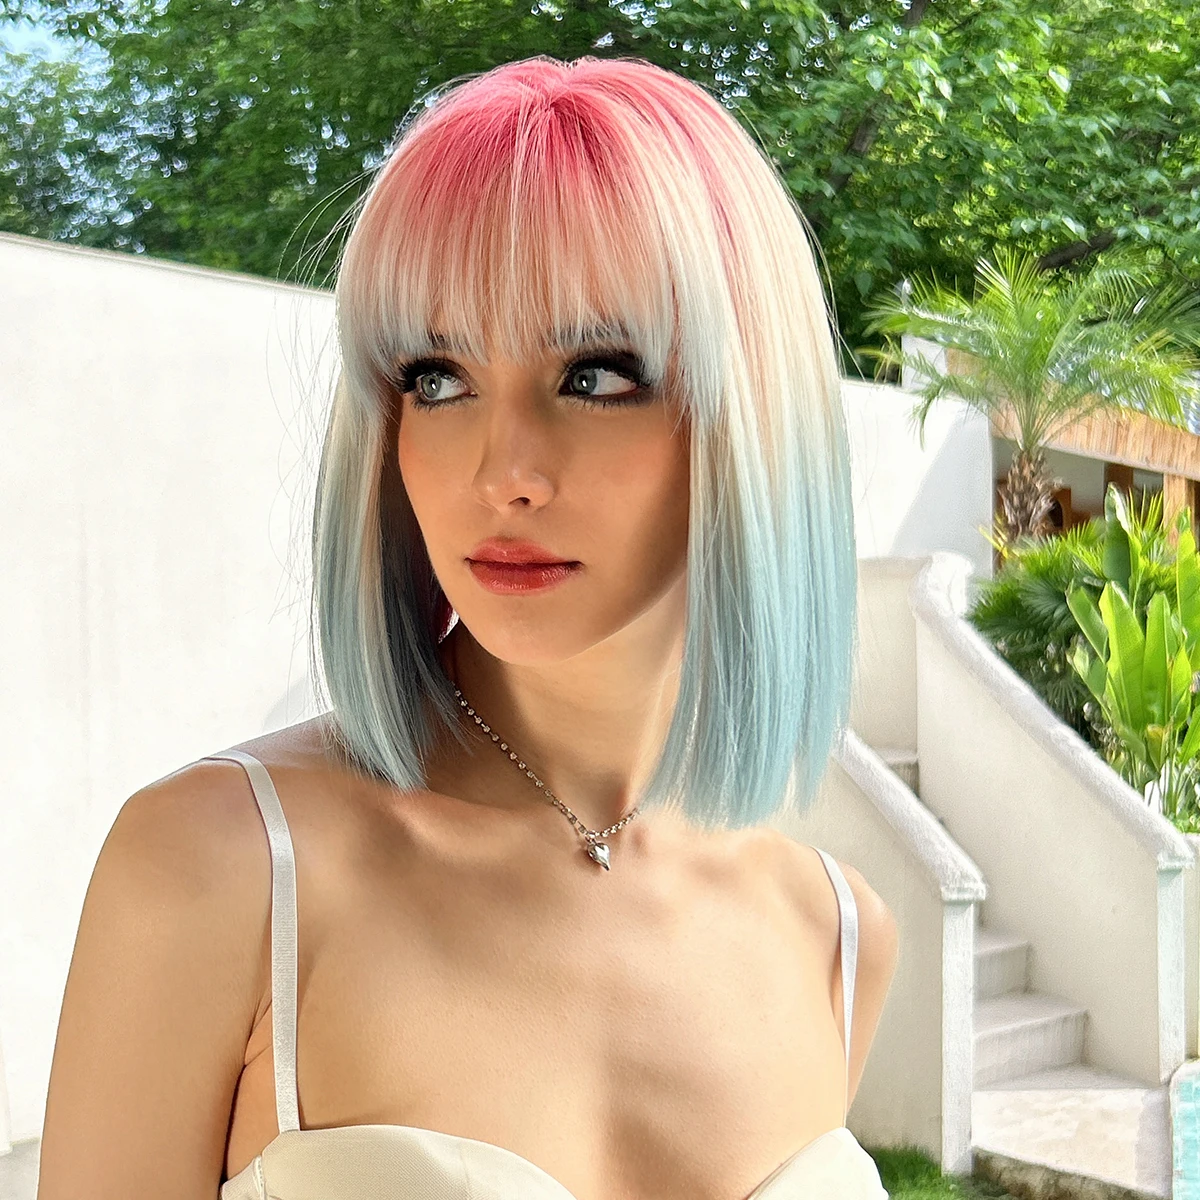 

Rainbow Bob Wig with Bang Synthetic Hair Bob Straight Wigs for Women Ombre Colored Short Shoulder Length Cosplay Hair Wig